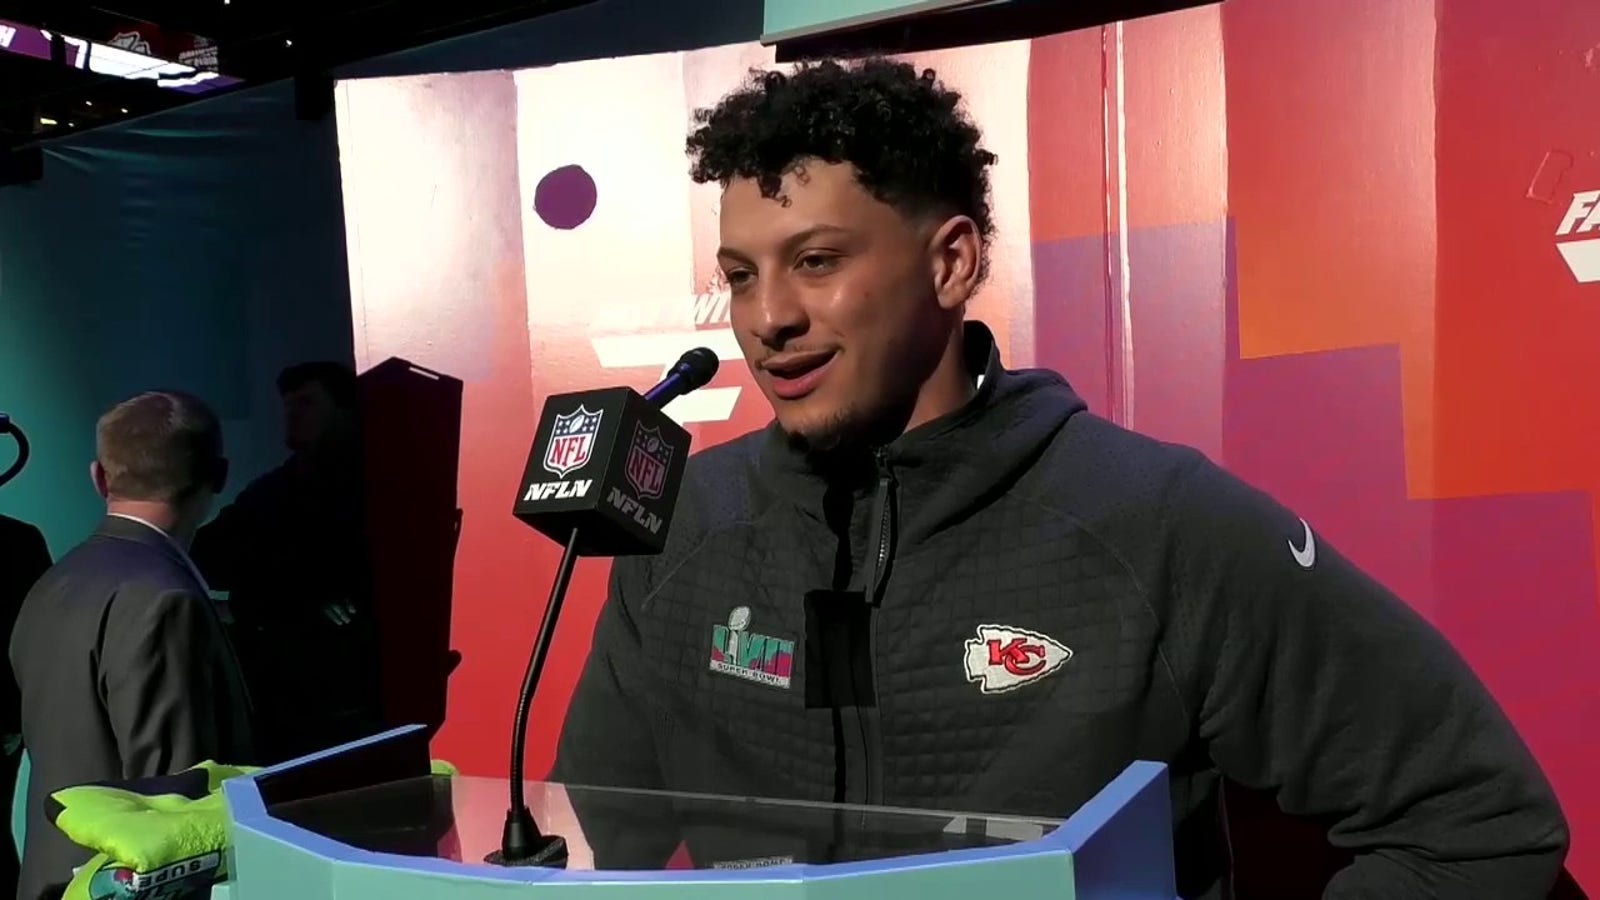 Patrick Mahomes to be able to play in front of his kids for the Super Bowl